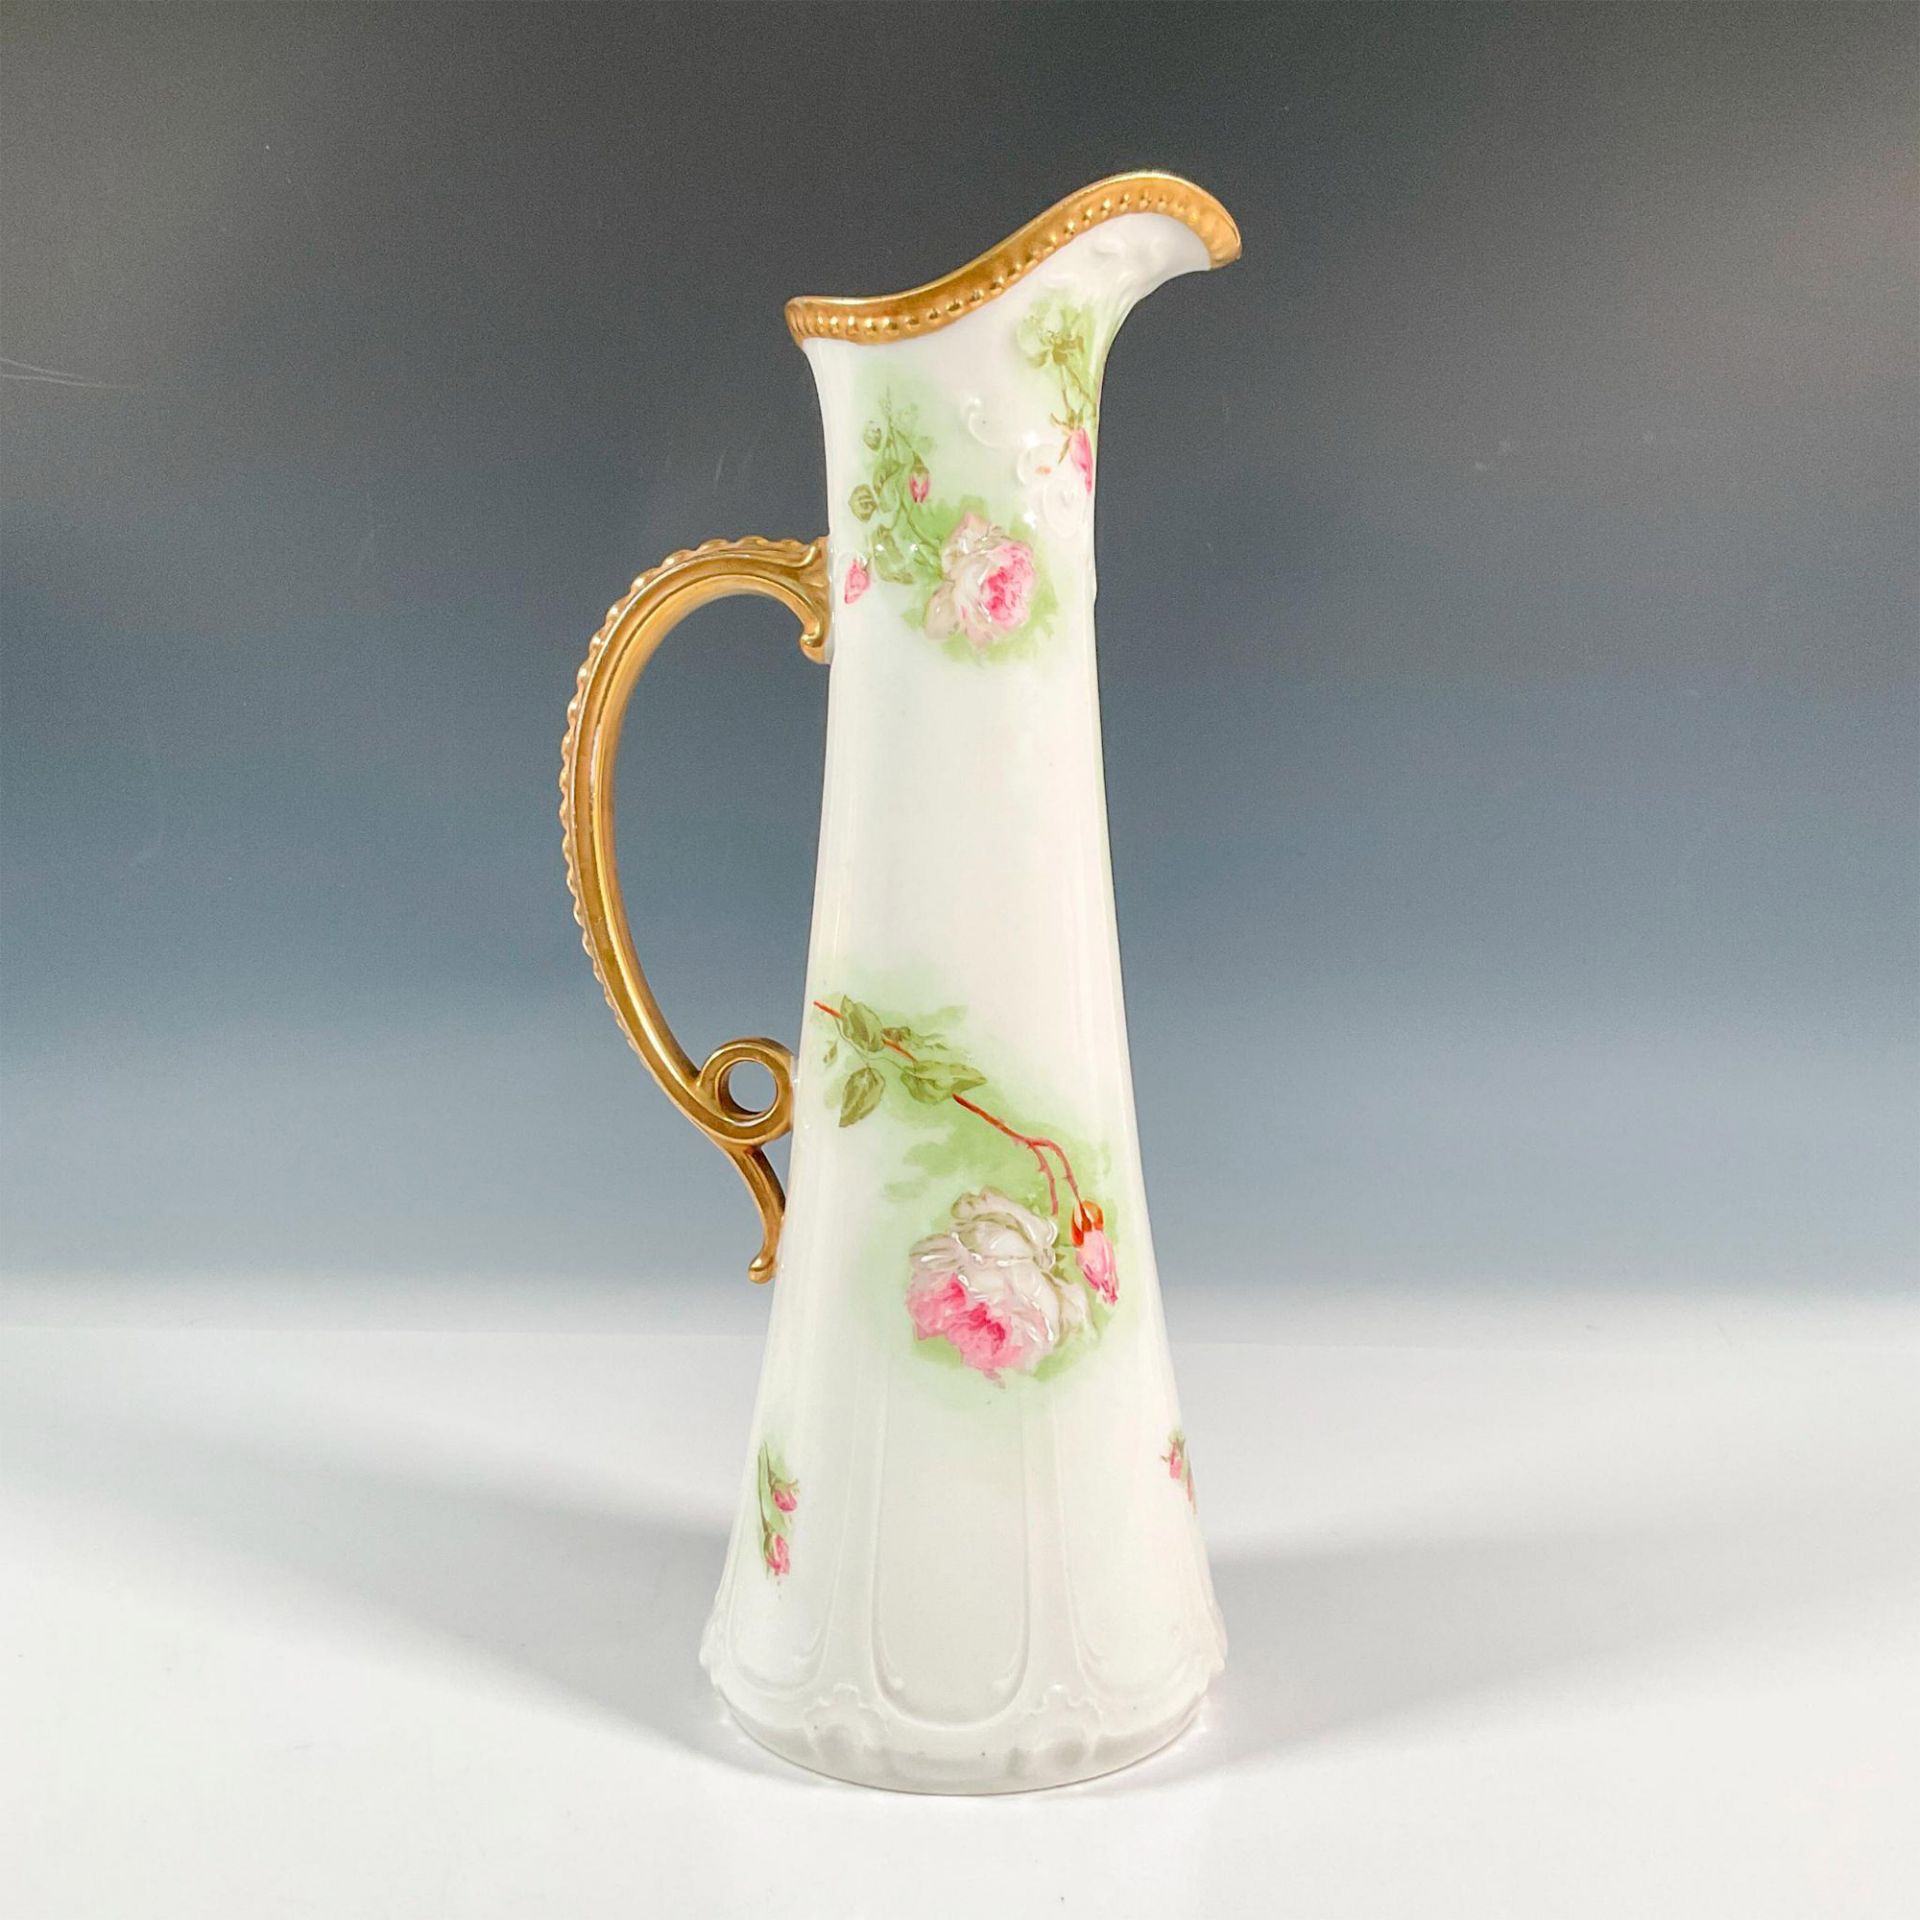 Coronet Porcelain Limoges Roes Pitcher - Image 2 of 4